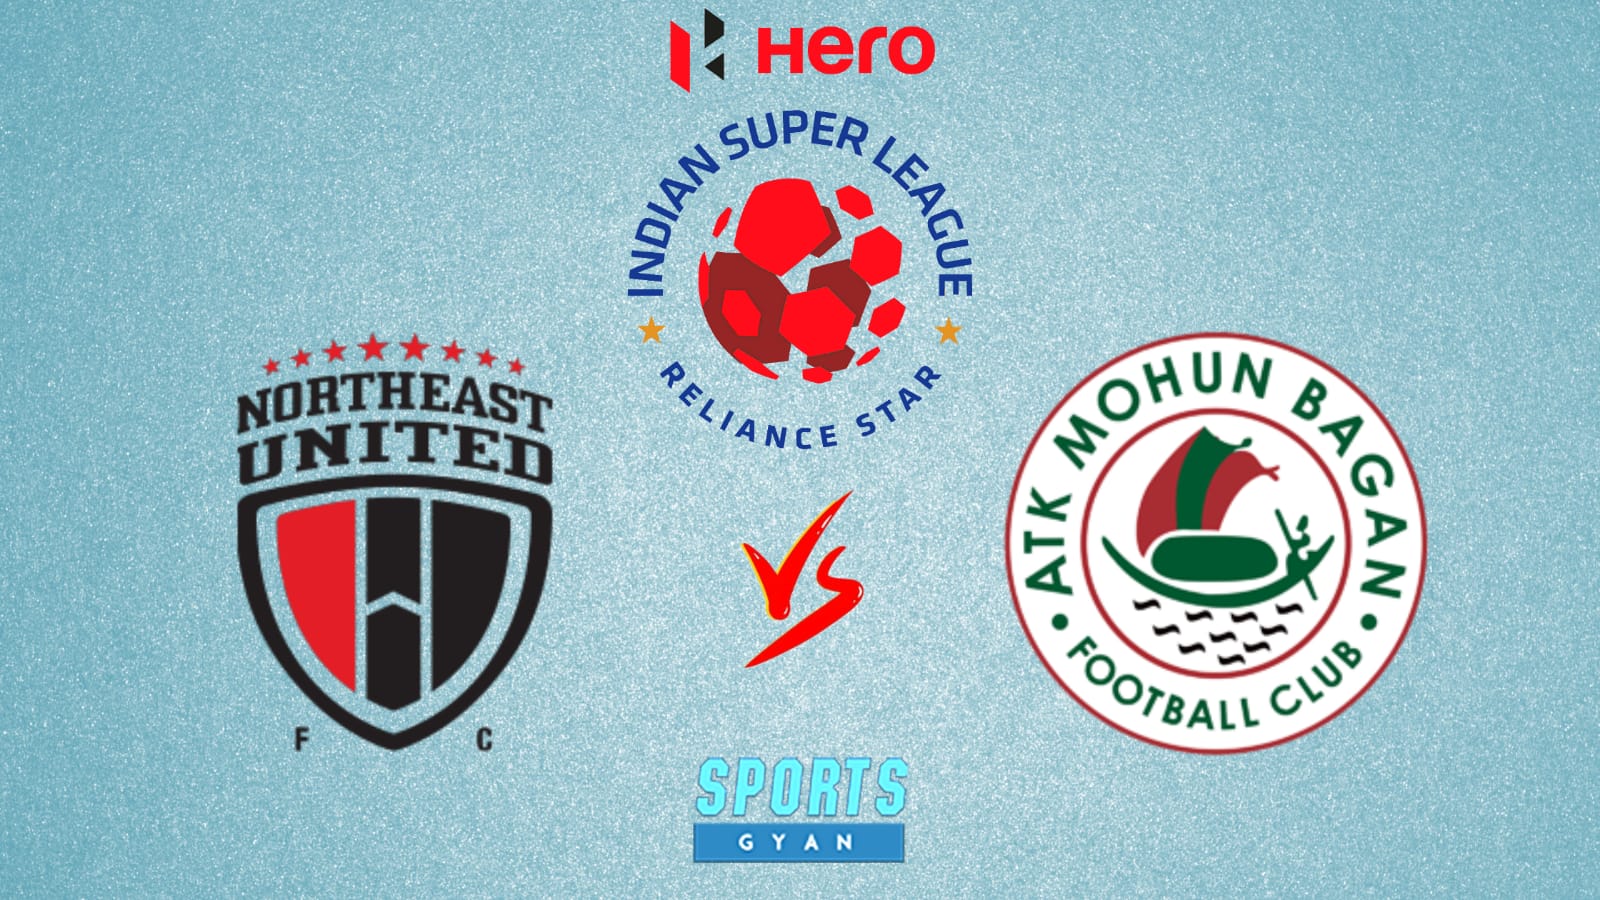 NEUFC vs ATKMB Deam 11 Prediction, Player stats, Playing 11, Dream11 team and Injury Update!